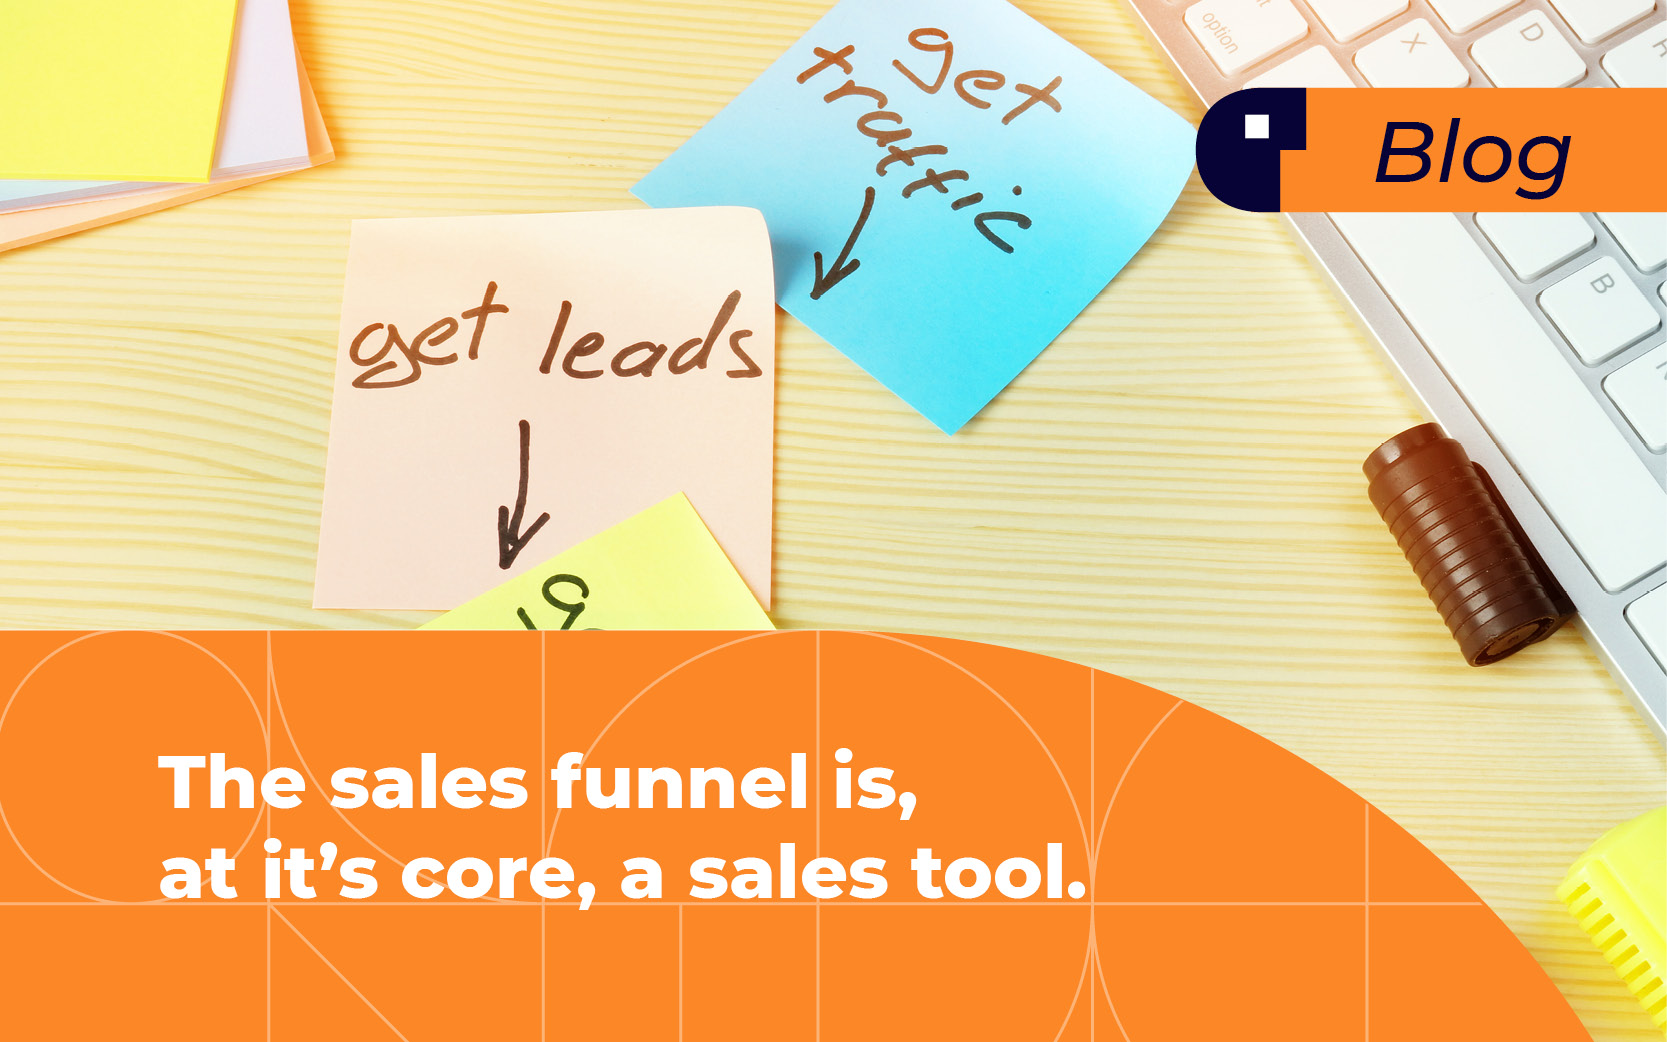 Demographica B2B Agency - The Sales funnel is, at it's core, a sales tool